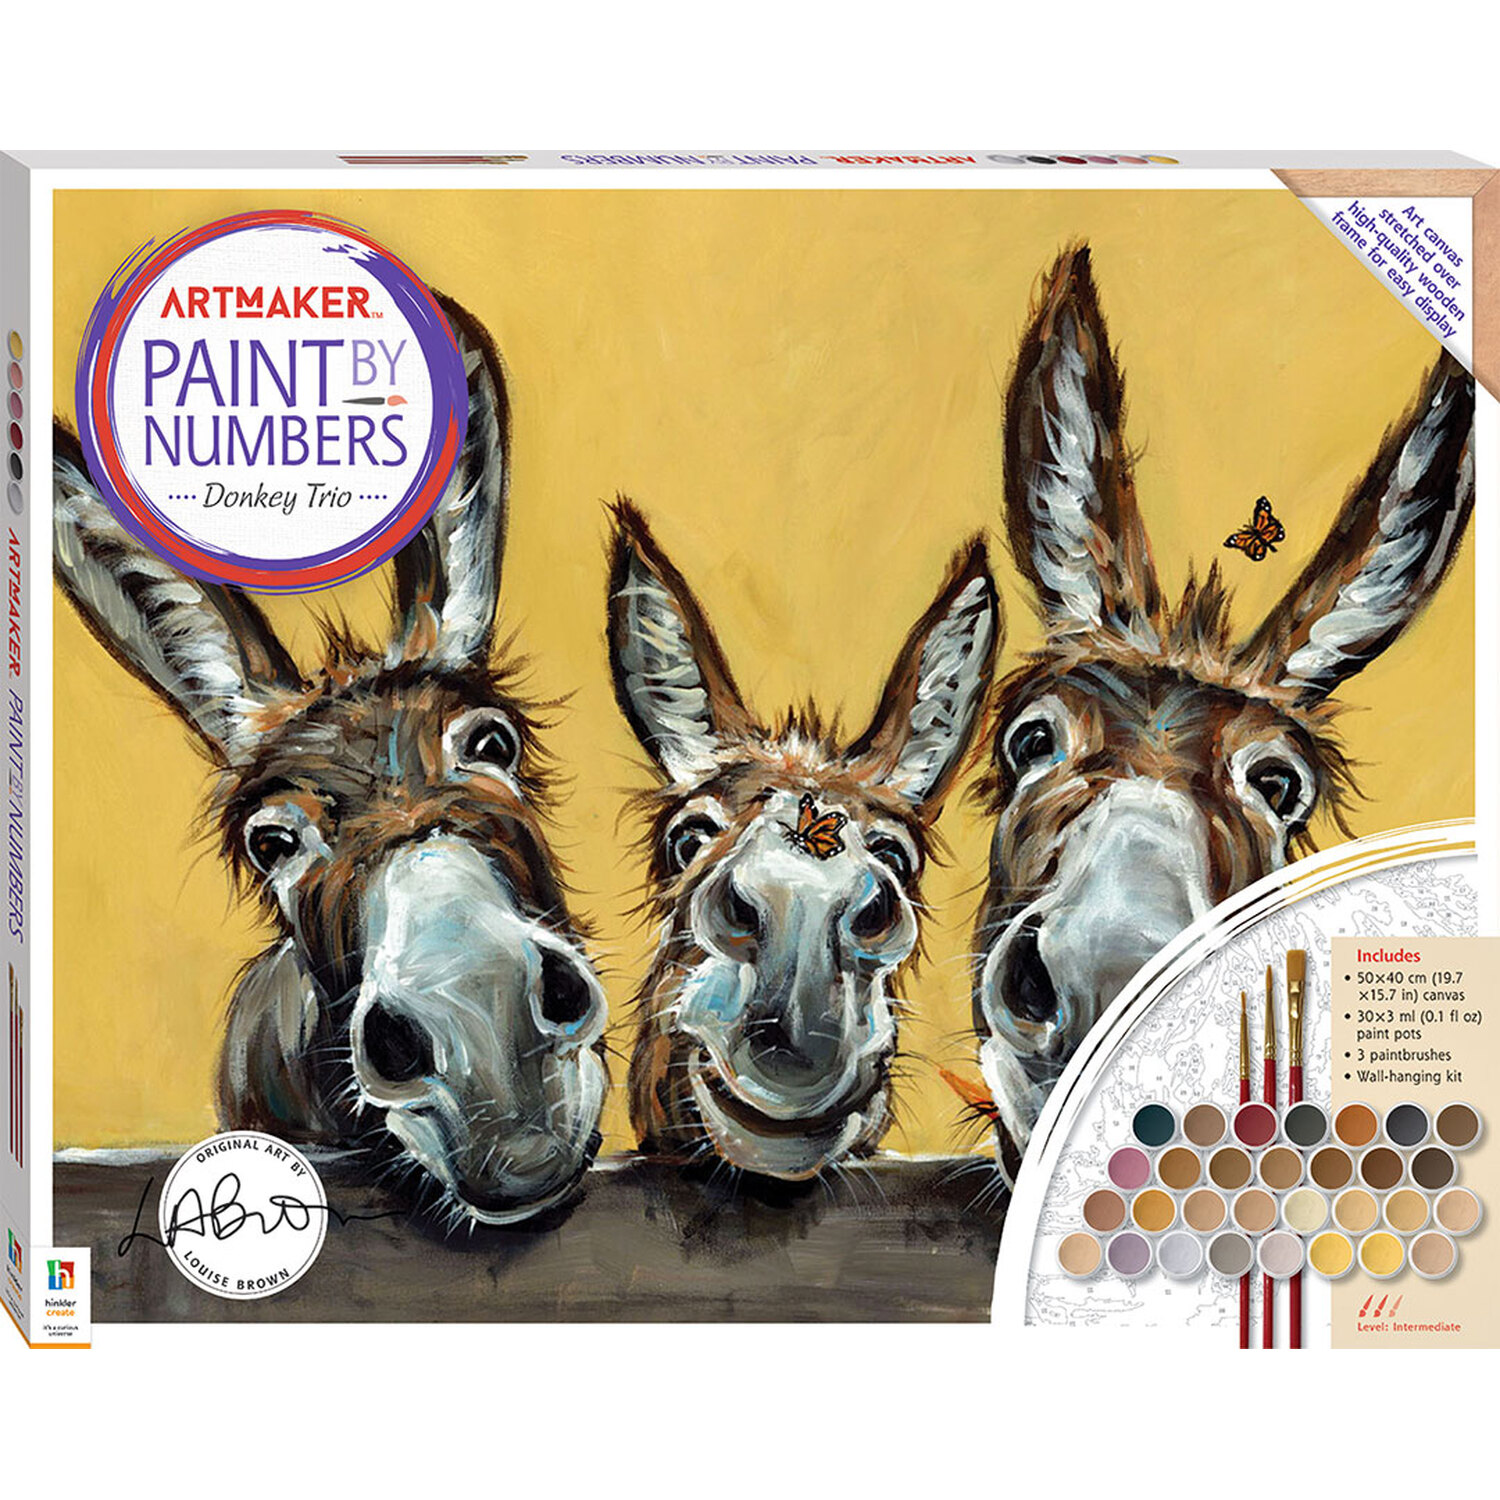 Hinkler Paint by Numbers Donkey Trio Canvas Kit Image